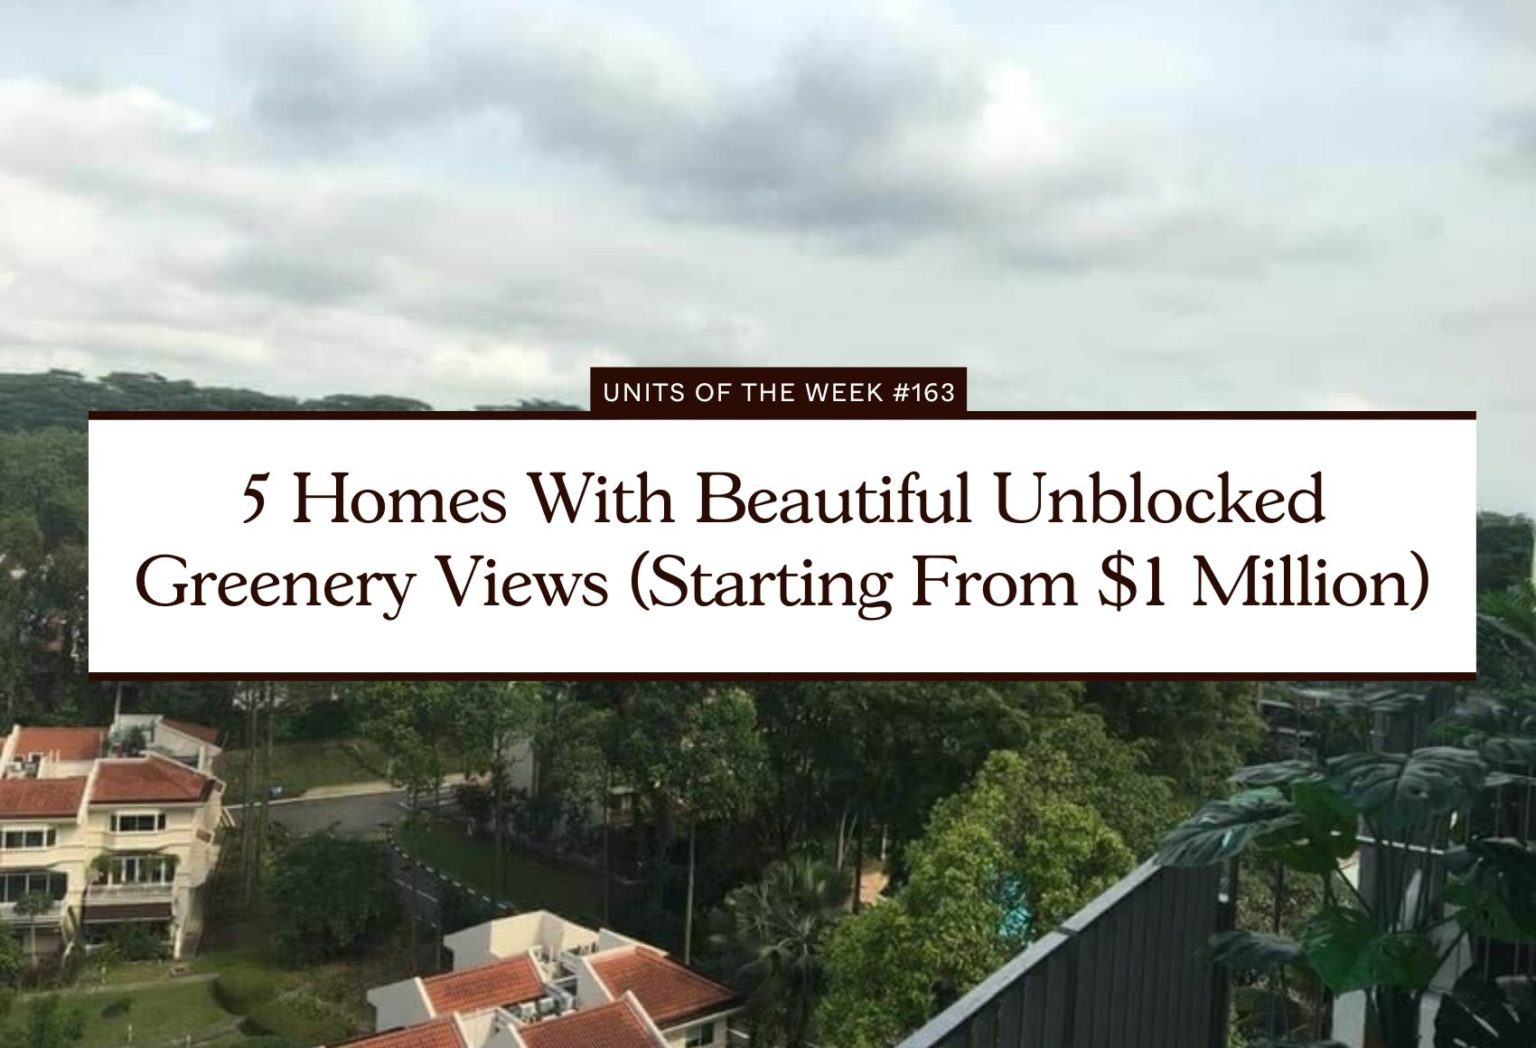 5 Homes With Beautiful Unblocked Greenery Views Starting From 1 Million